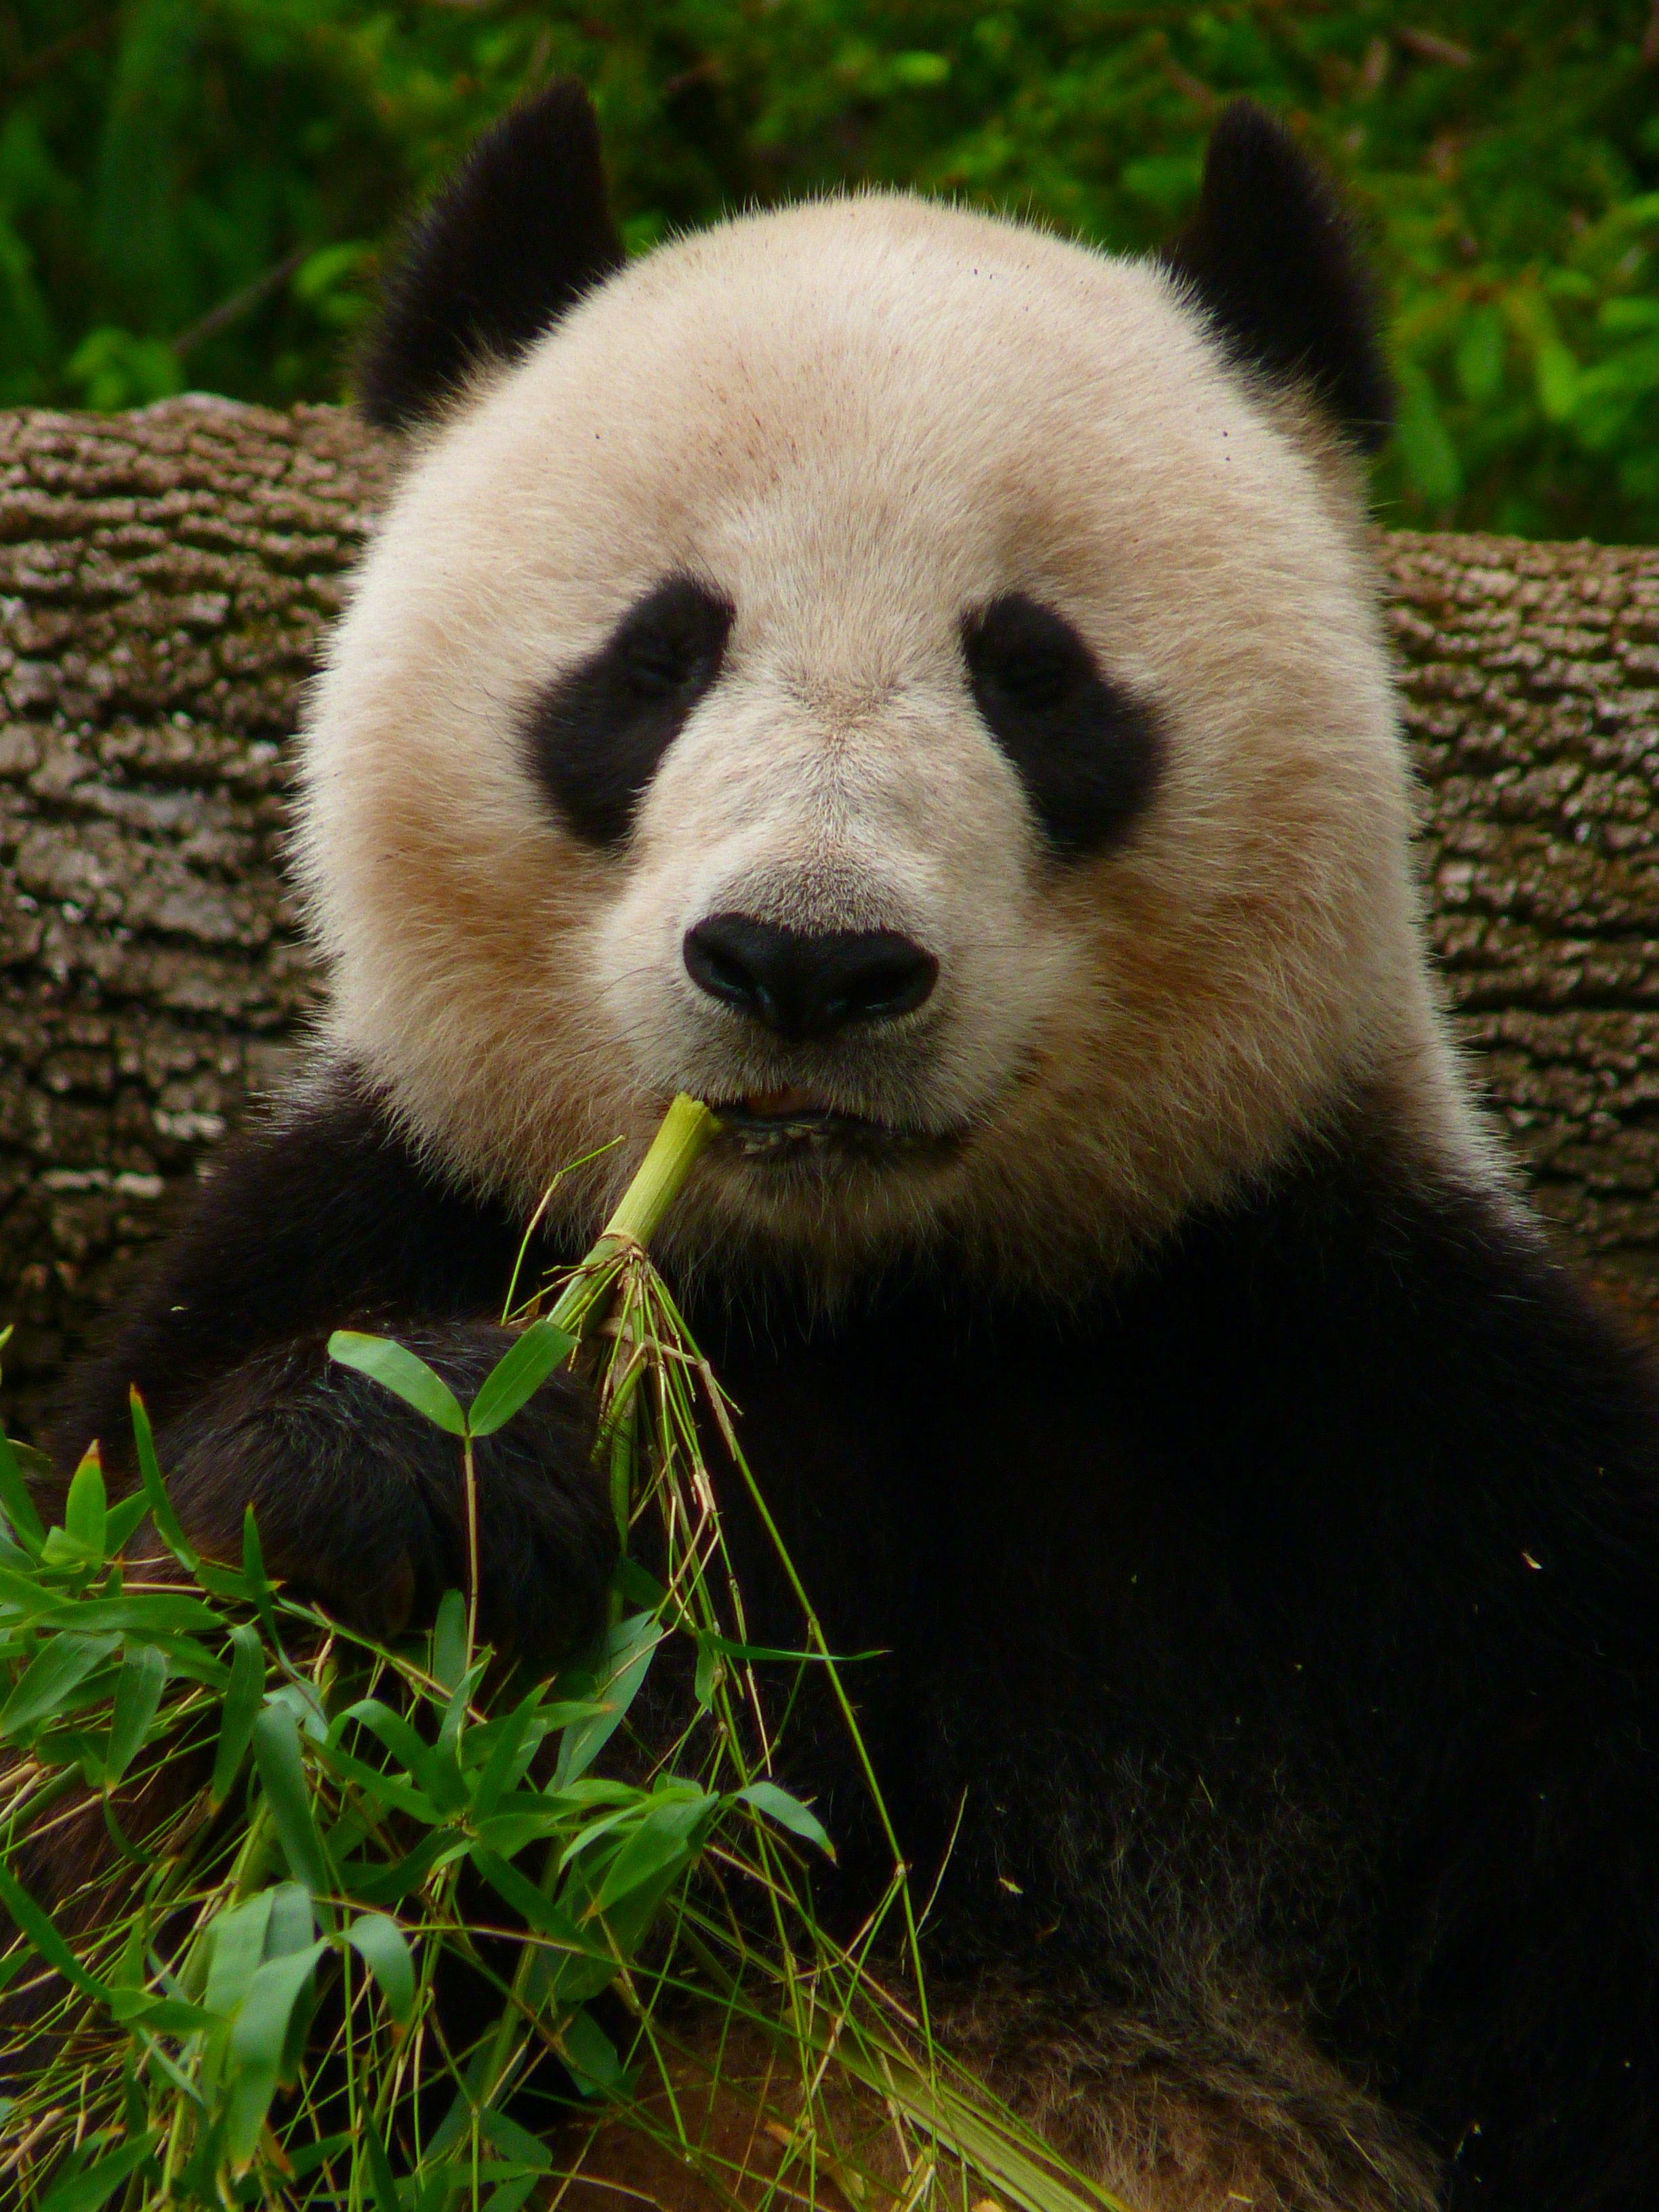 Corporate social responsibility, from glasses to pandas: SupplySide West report